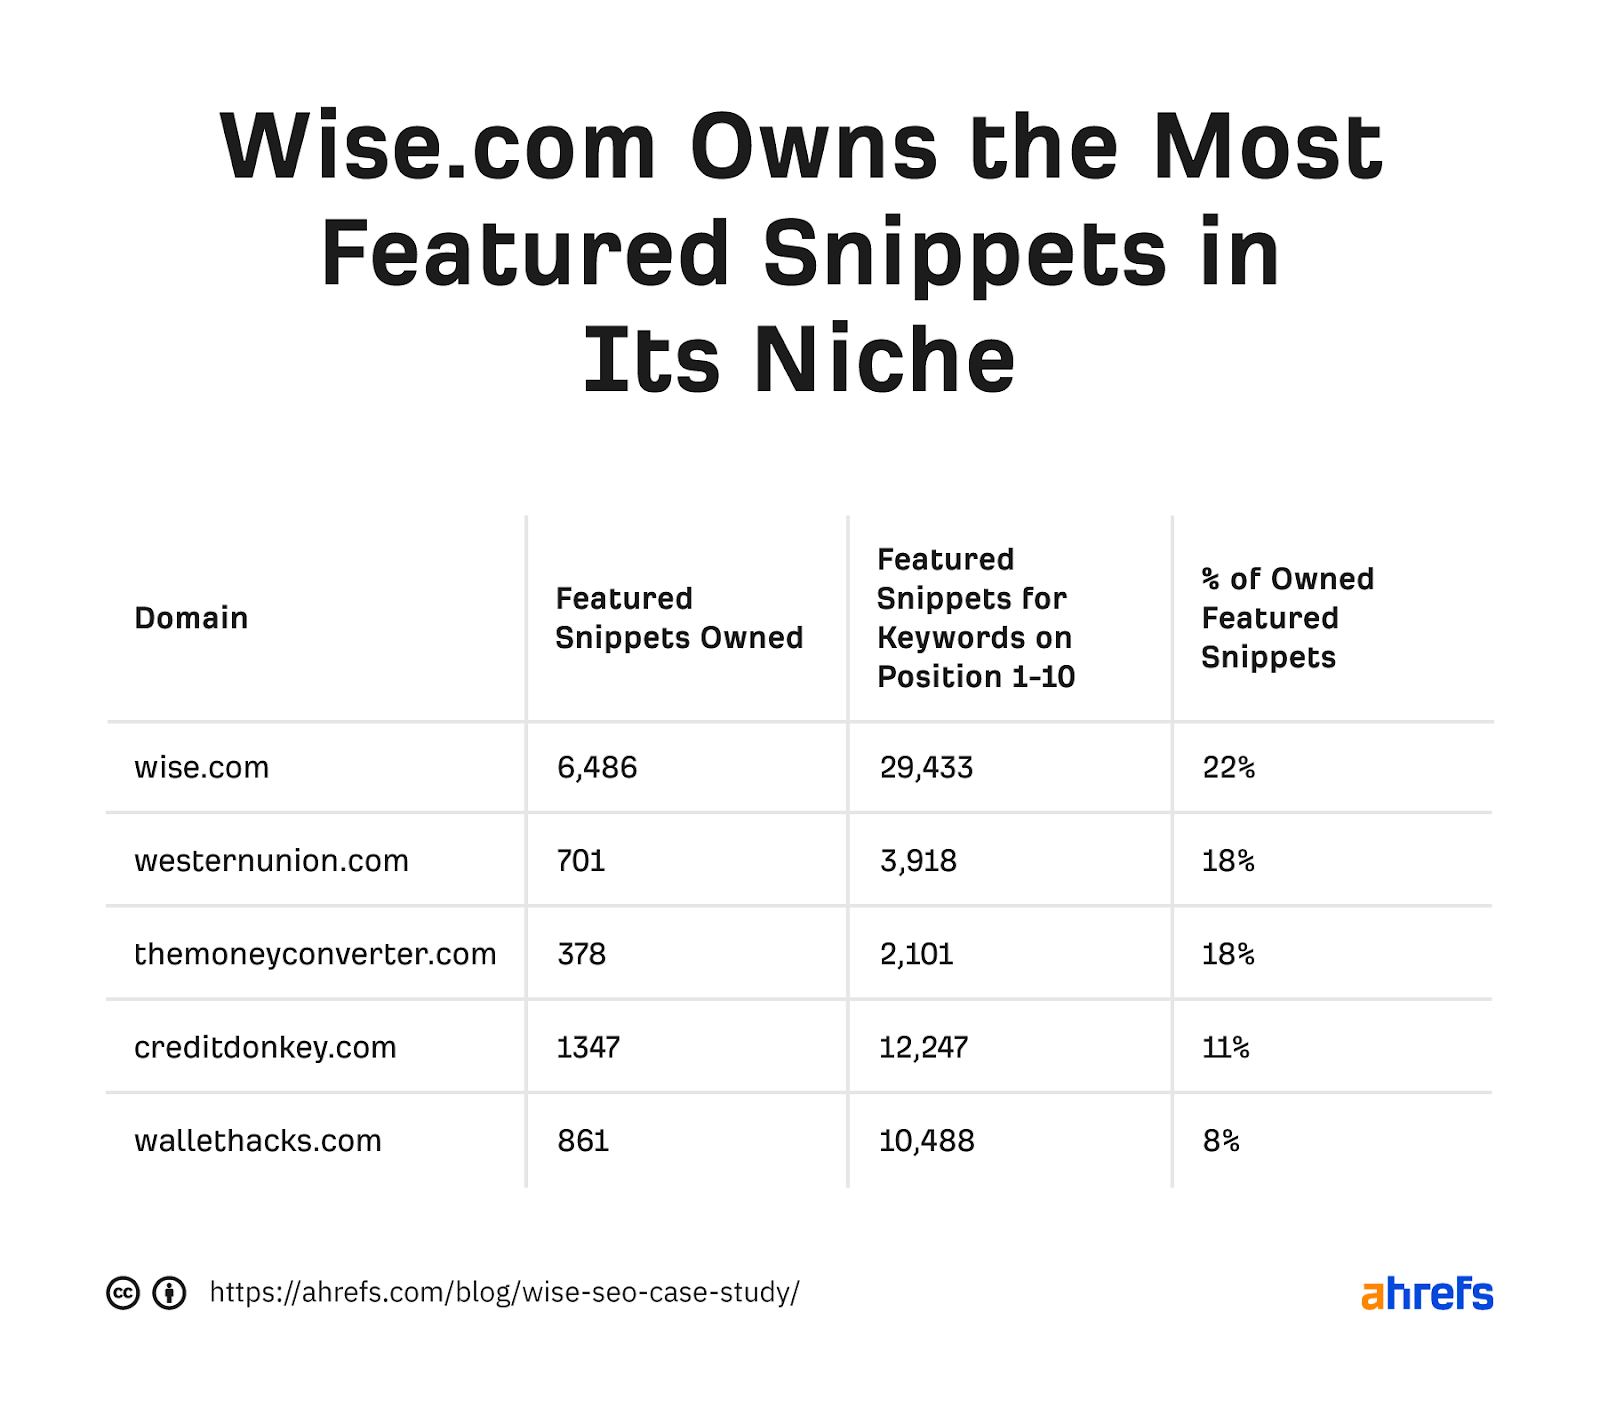 7 wise featured snippets vs competitors